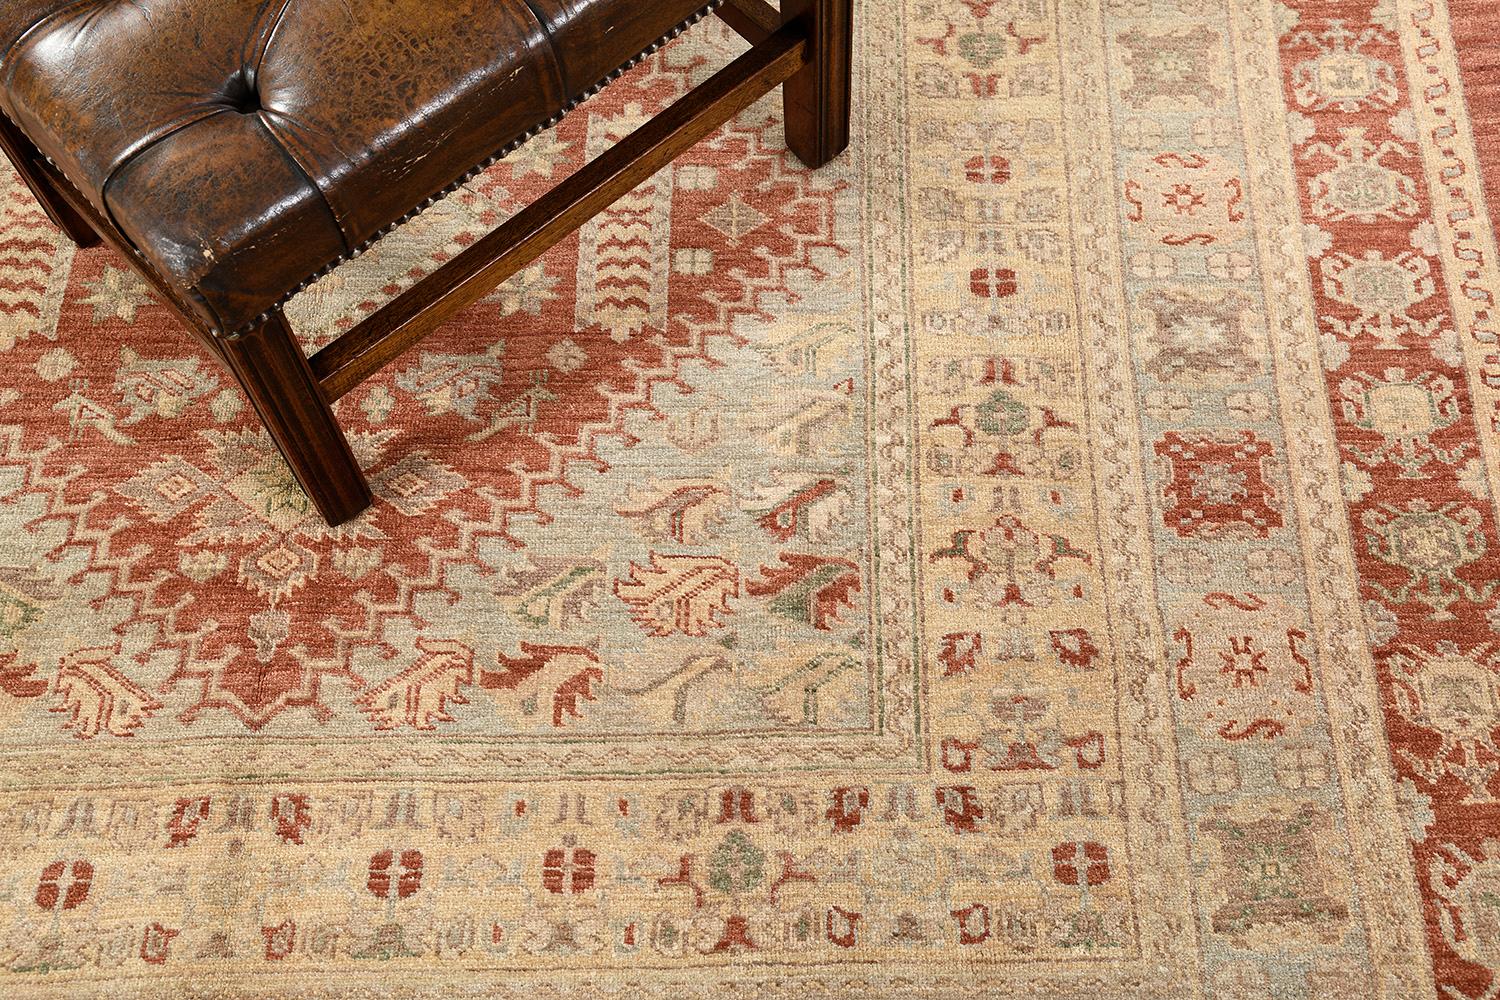 A stylishly luxurious hand-spun wool Gashgai Style Rug has immensely flexed its series of the band along the perimeter of emblems. It is surrounded by different kinds of intricate symbols and geometric motifs. The neutral color scheme with the red